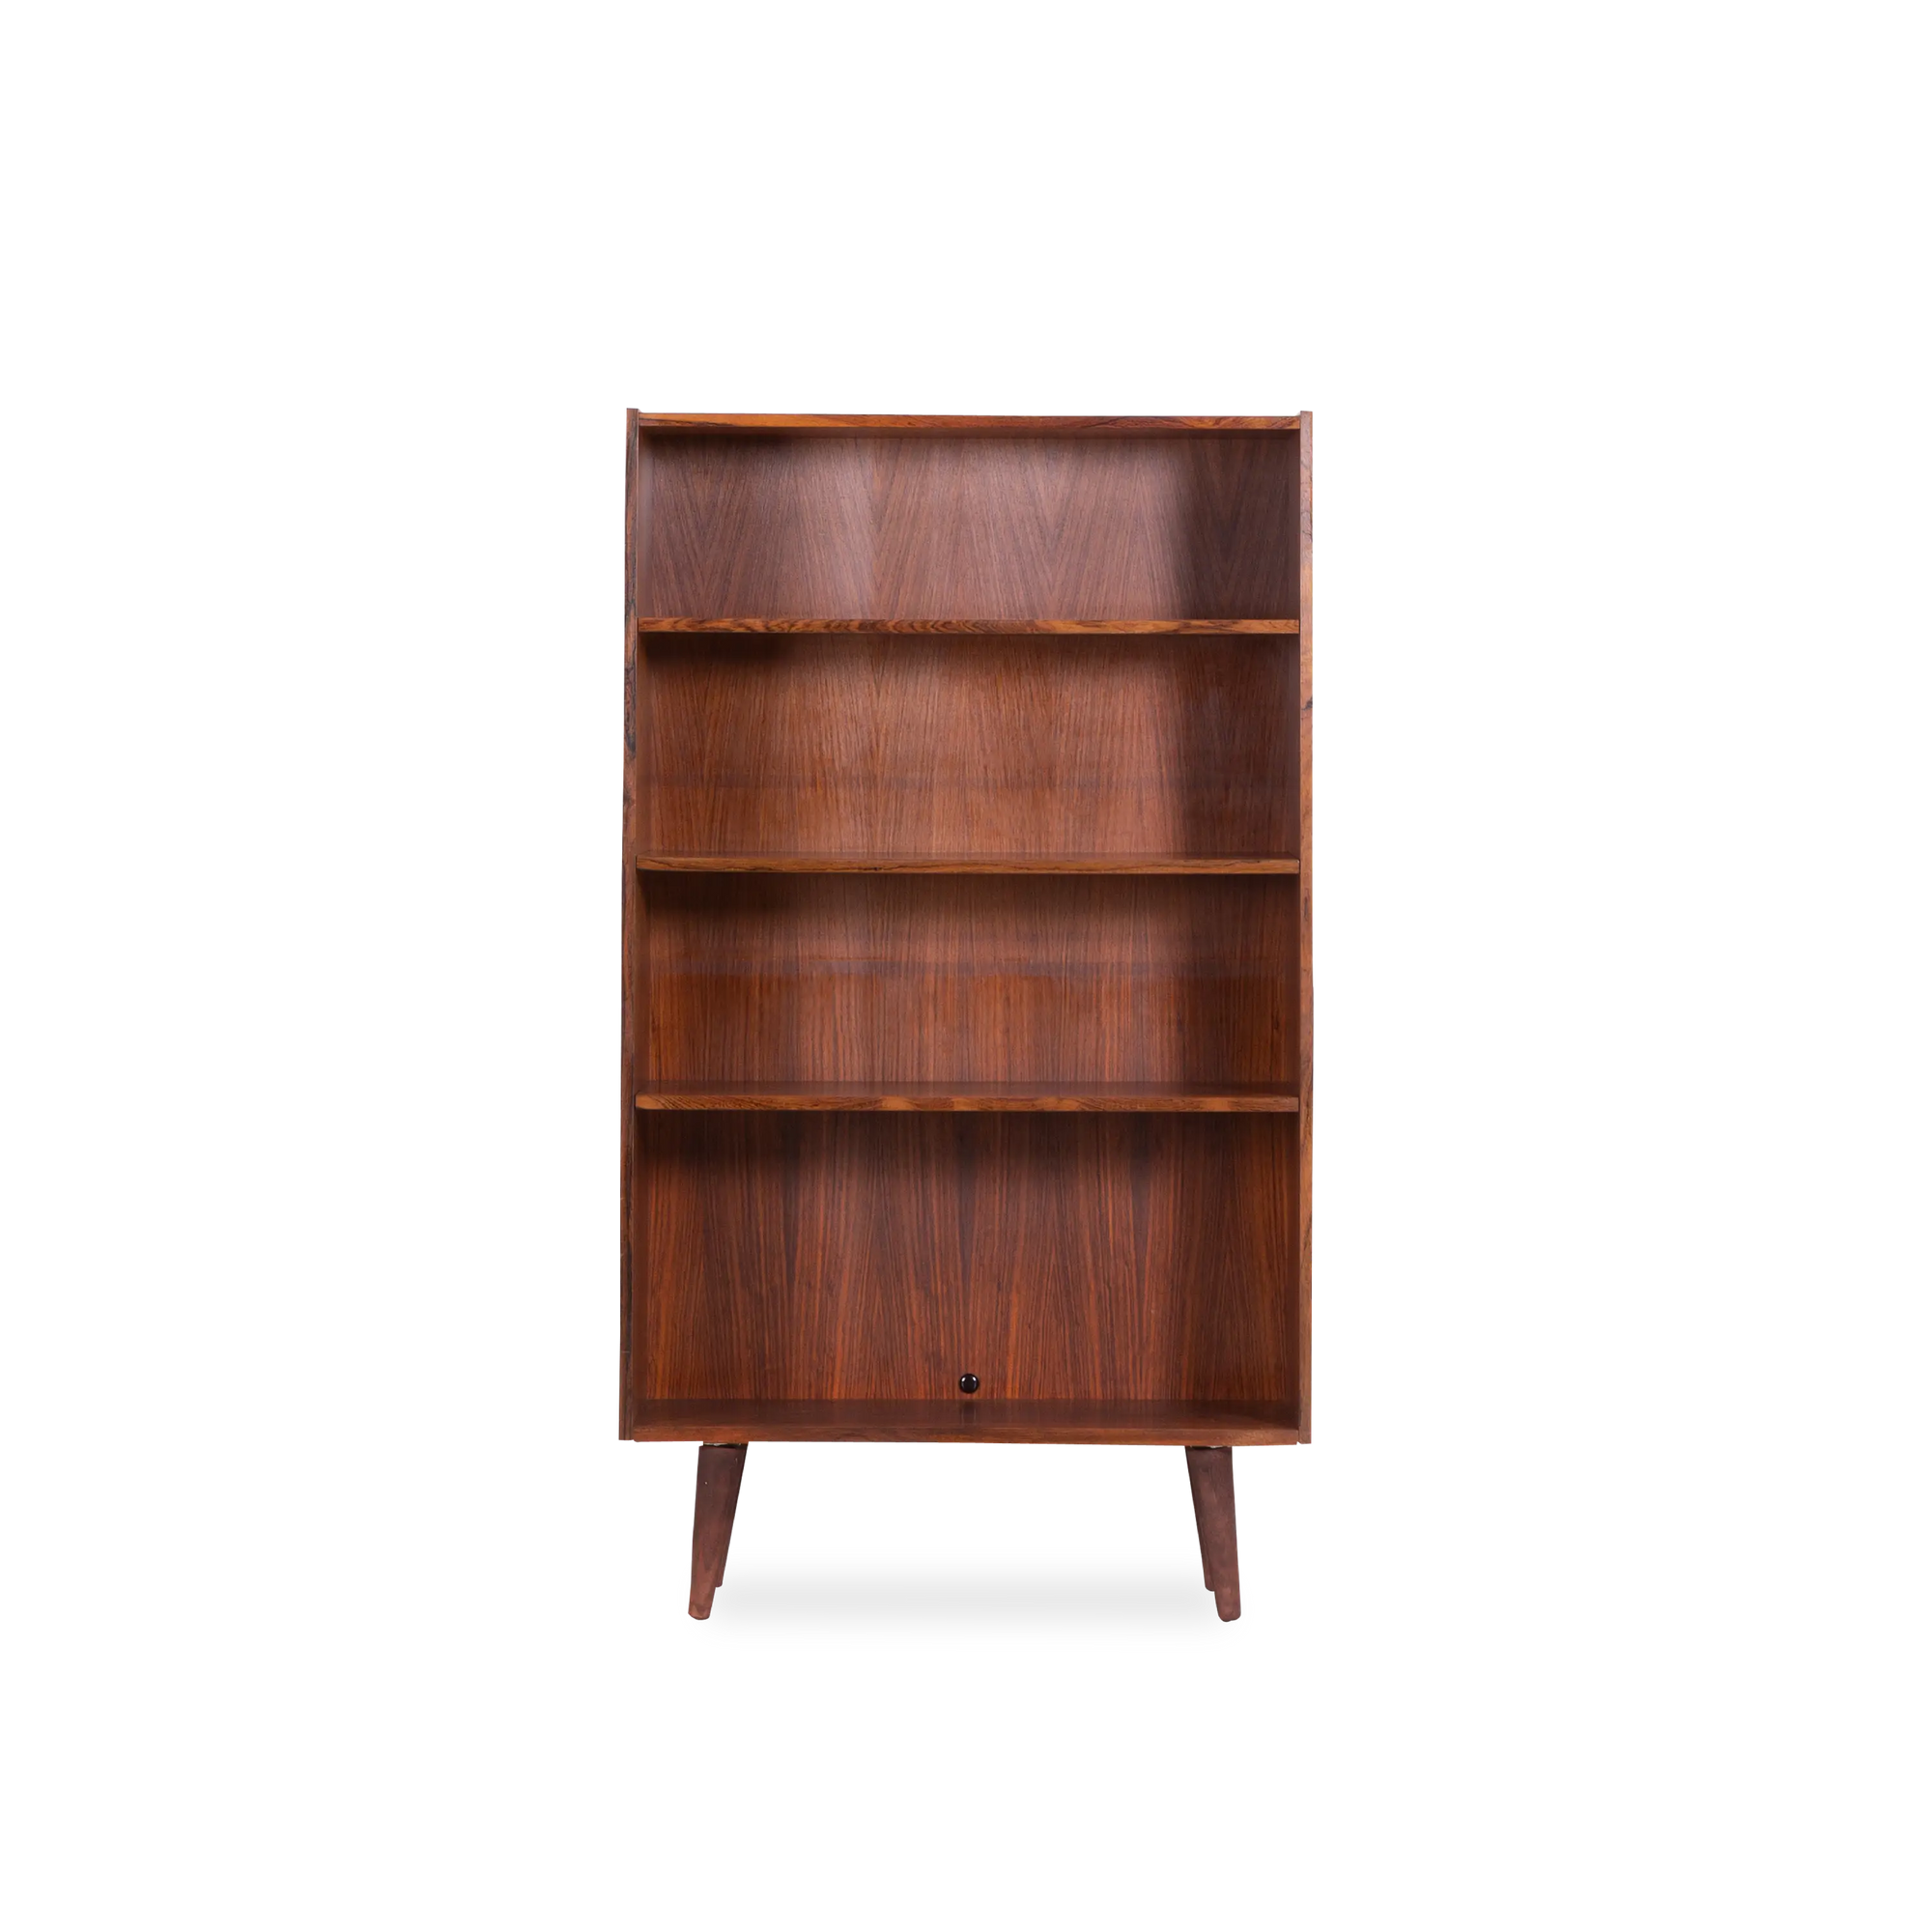 Crafted with the utmost precision and attention to detail, this vintage bookcase was manufactured in Denmark, circa 1960s.